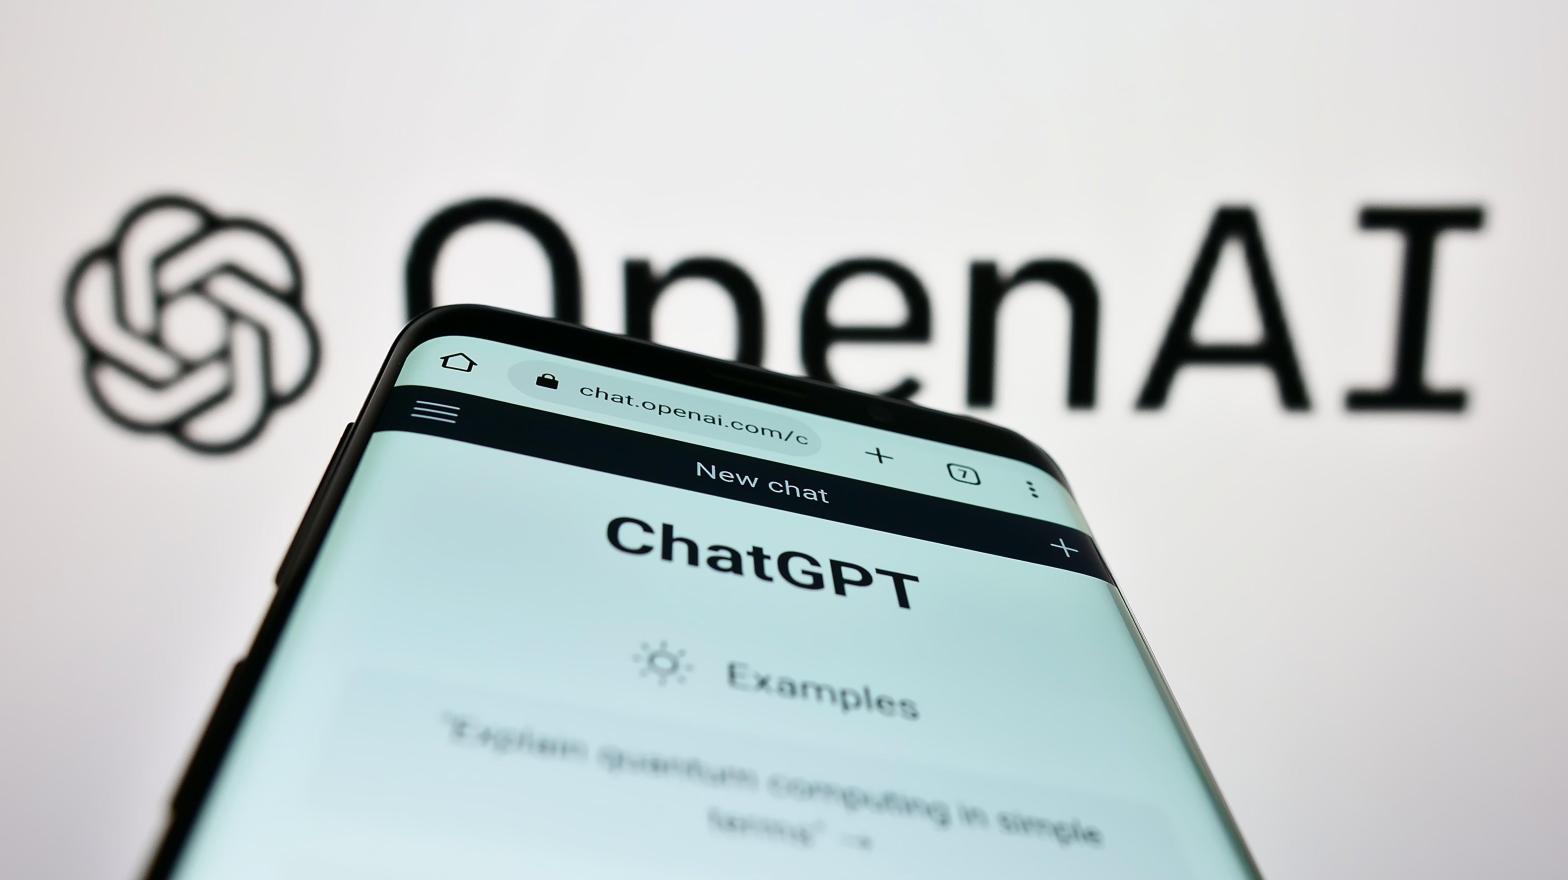 OpenAI released ChatGPT-4 last month, but ChatGPT-5 is not coming soon according to CEO Sam Altman. (Image: T. Schneider, Shutterstock)